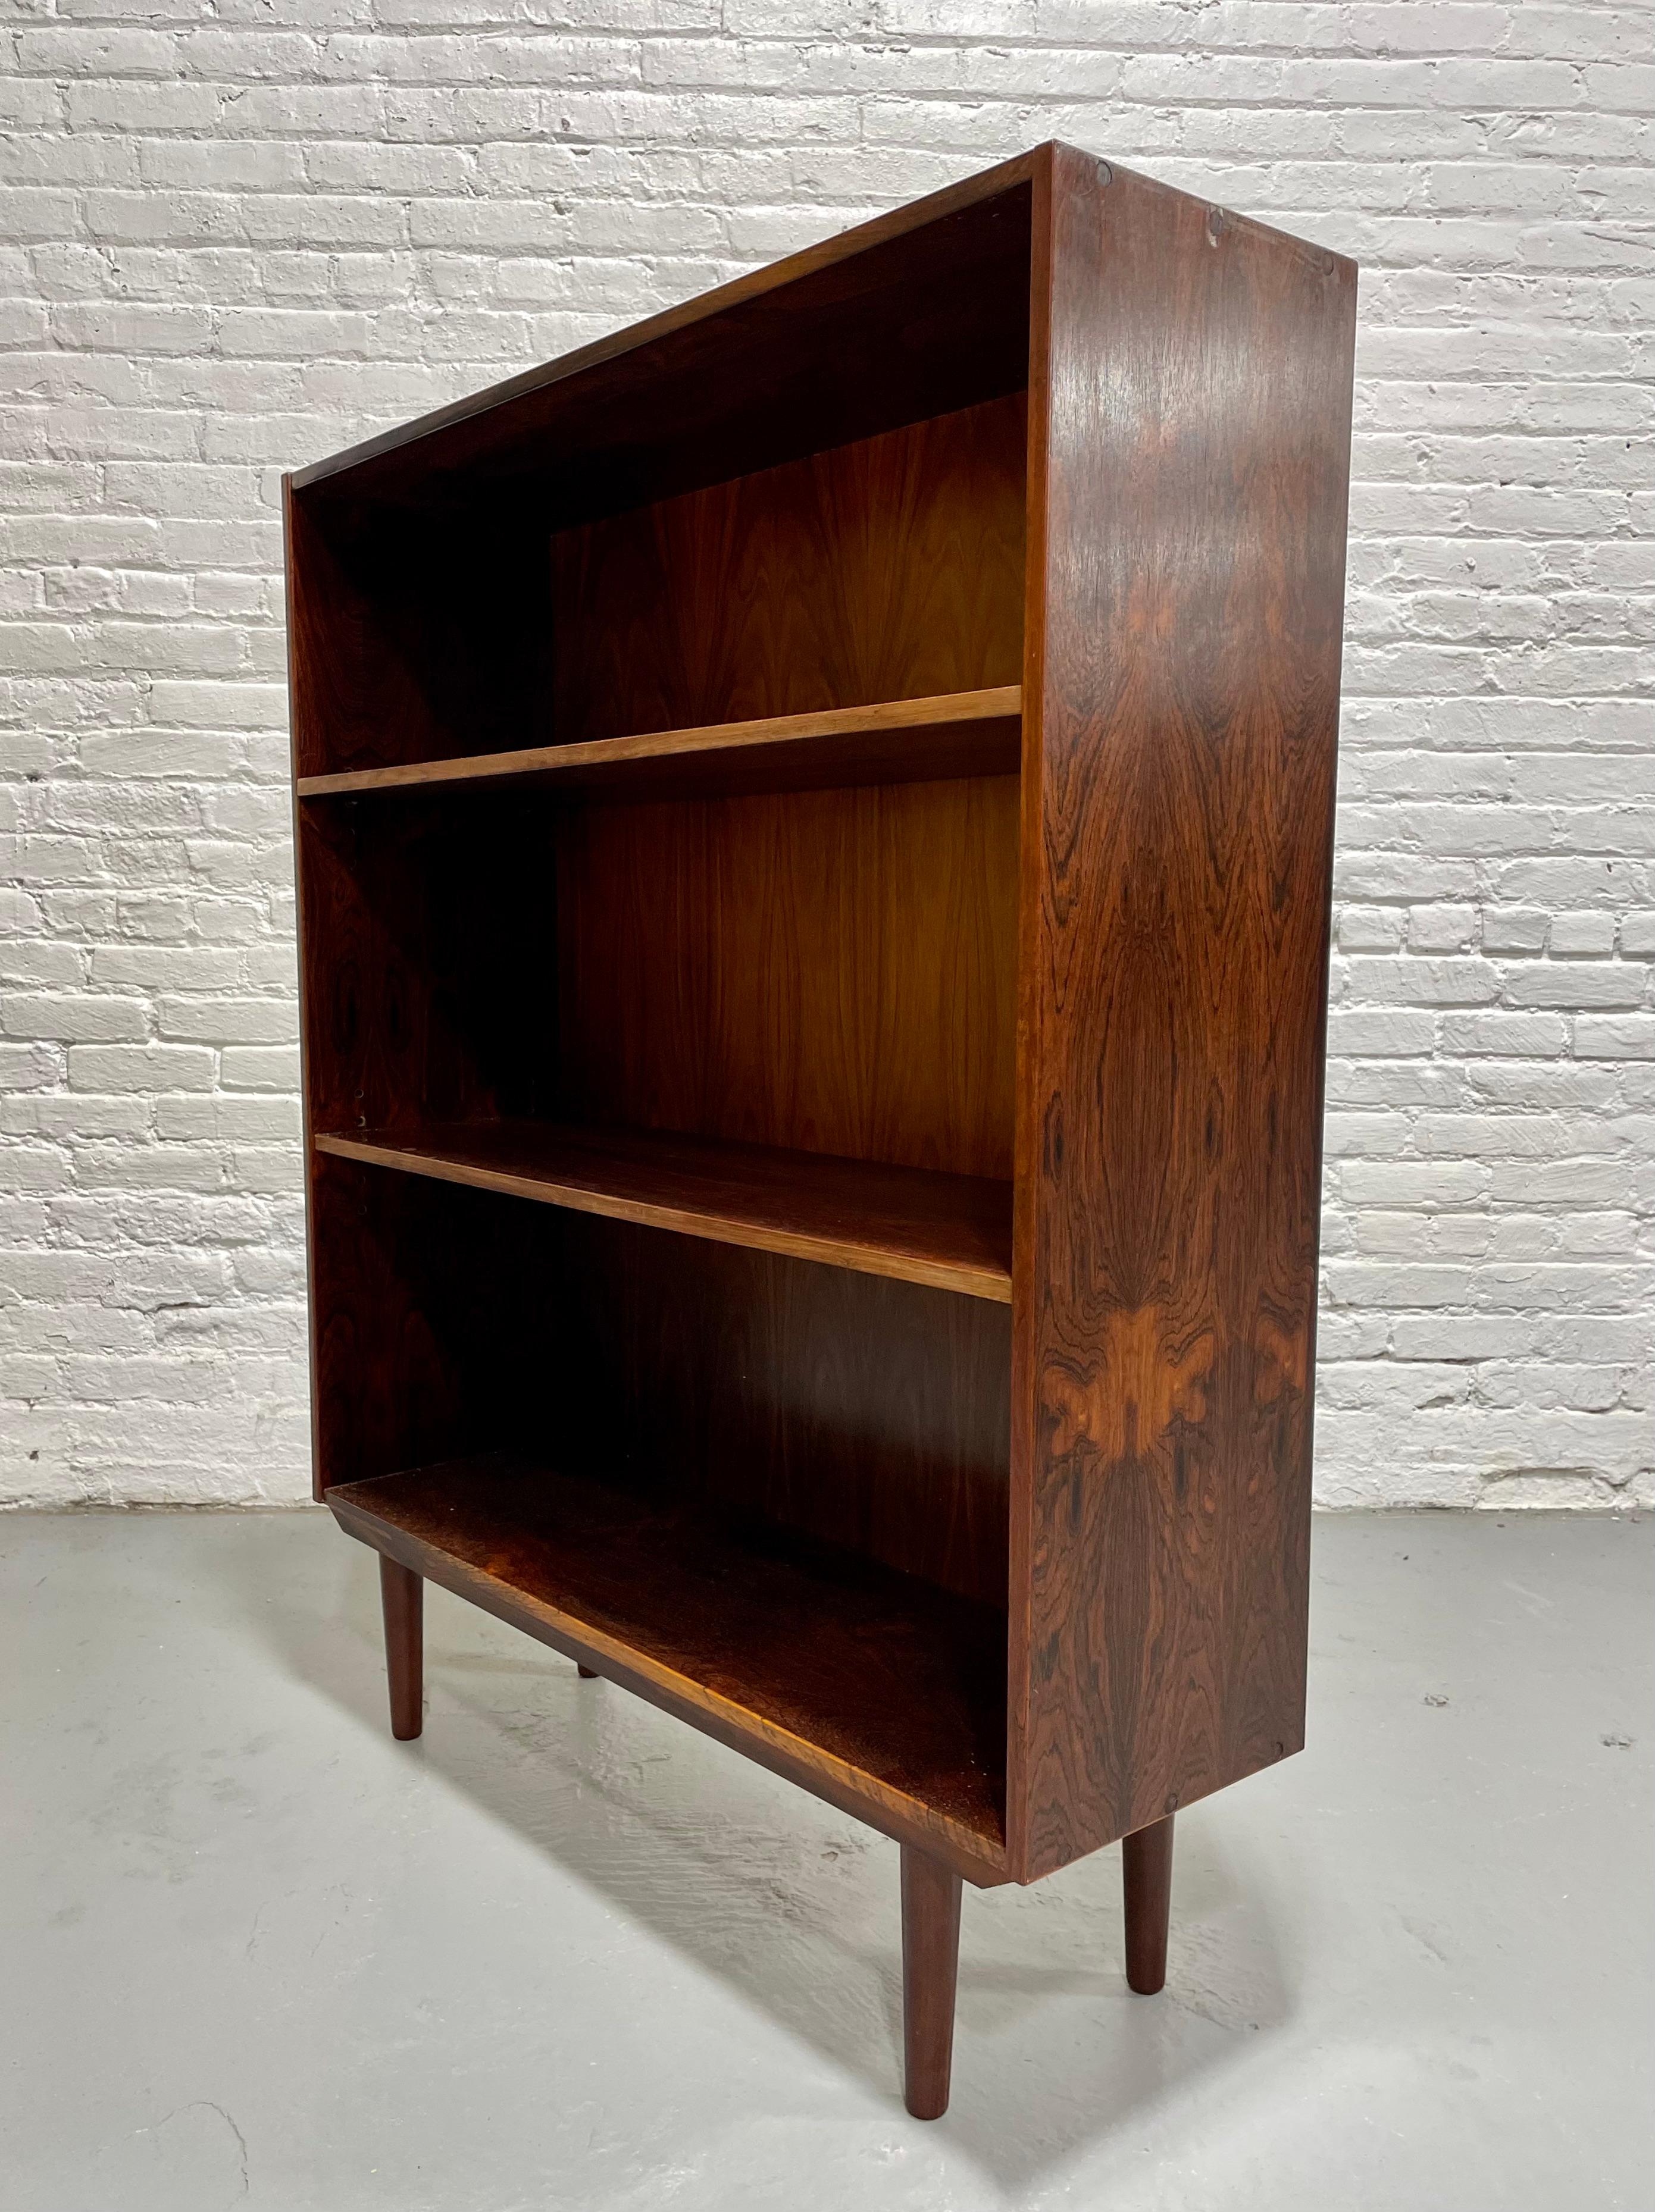 DANISH Mid Century Modern ROSEWOOD BOOKCASE, c. 1960's For Sale 1